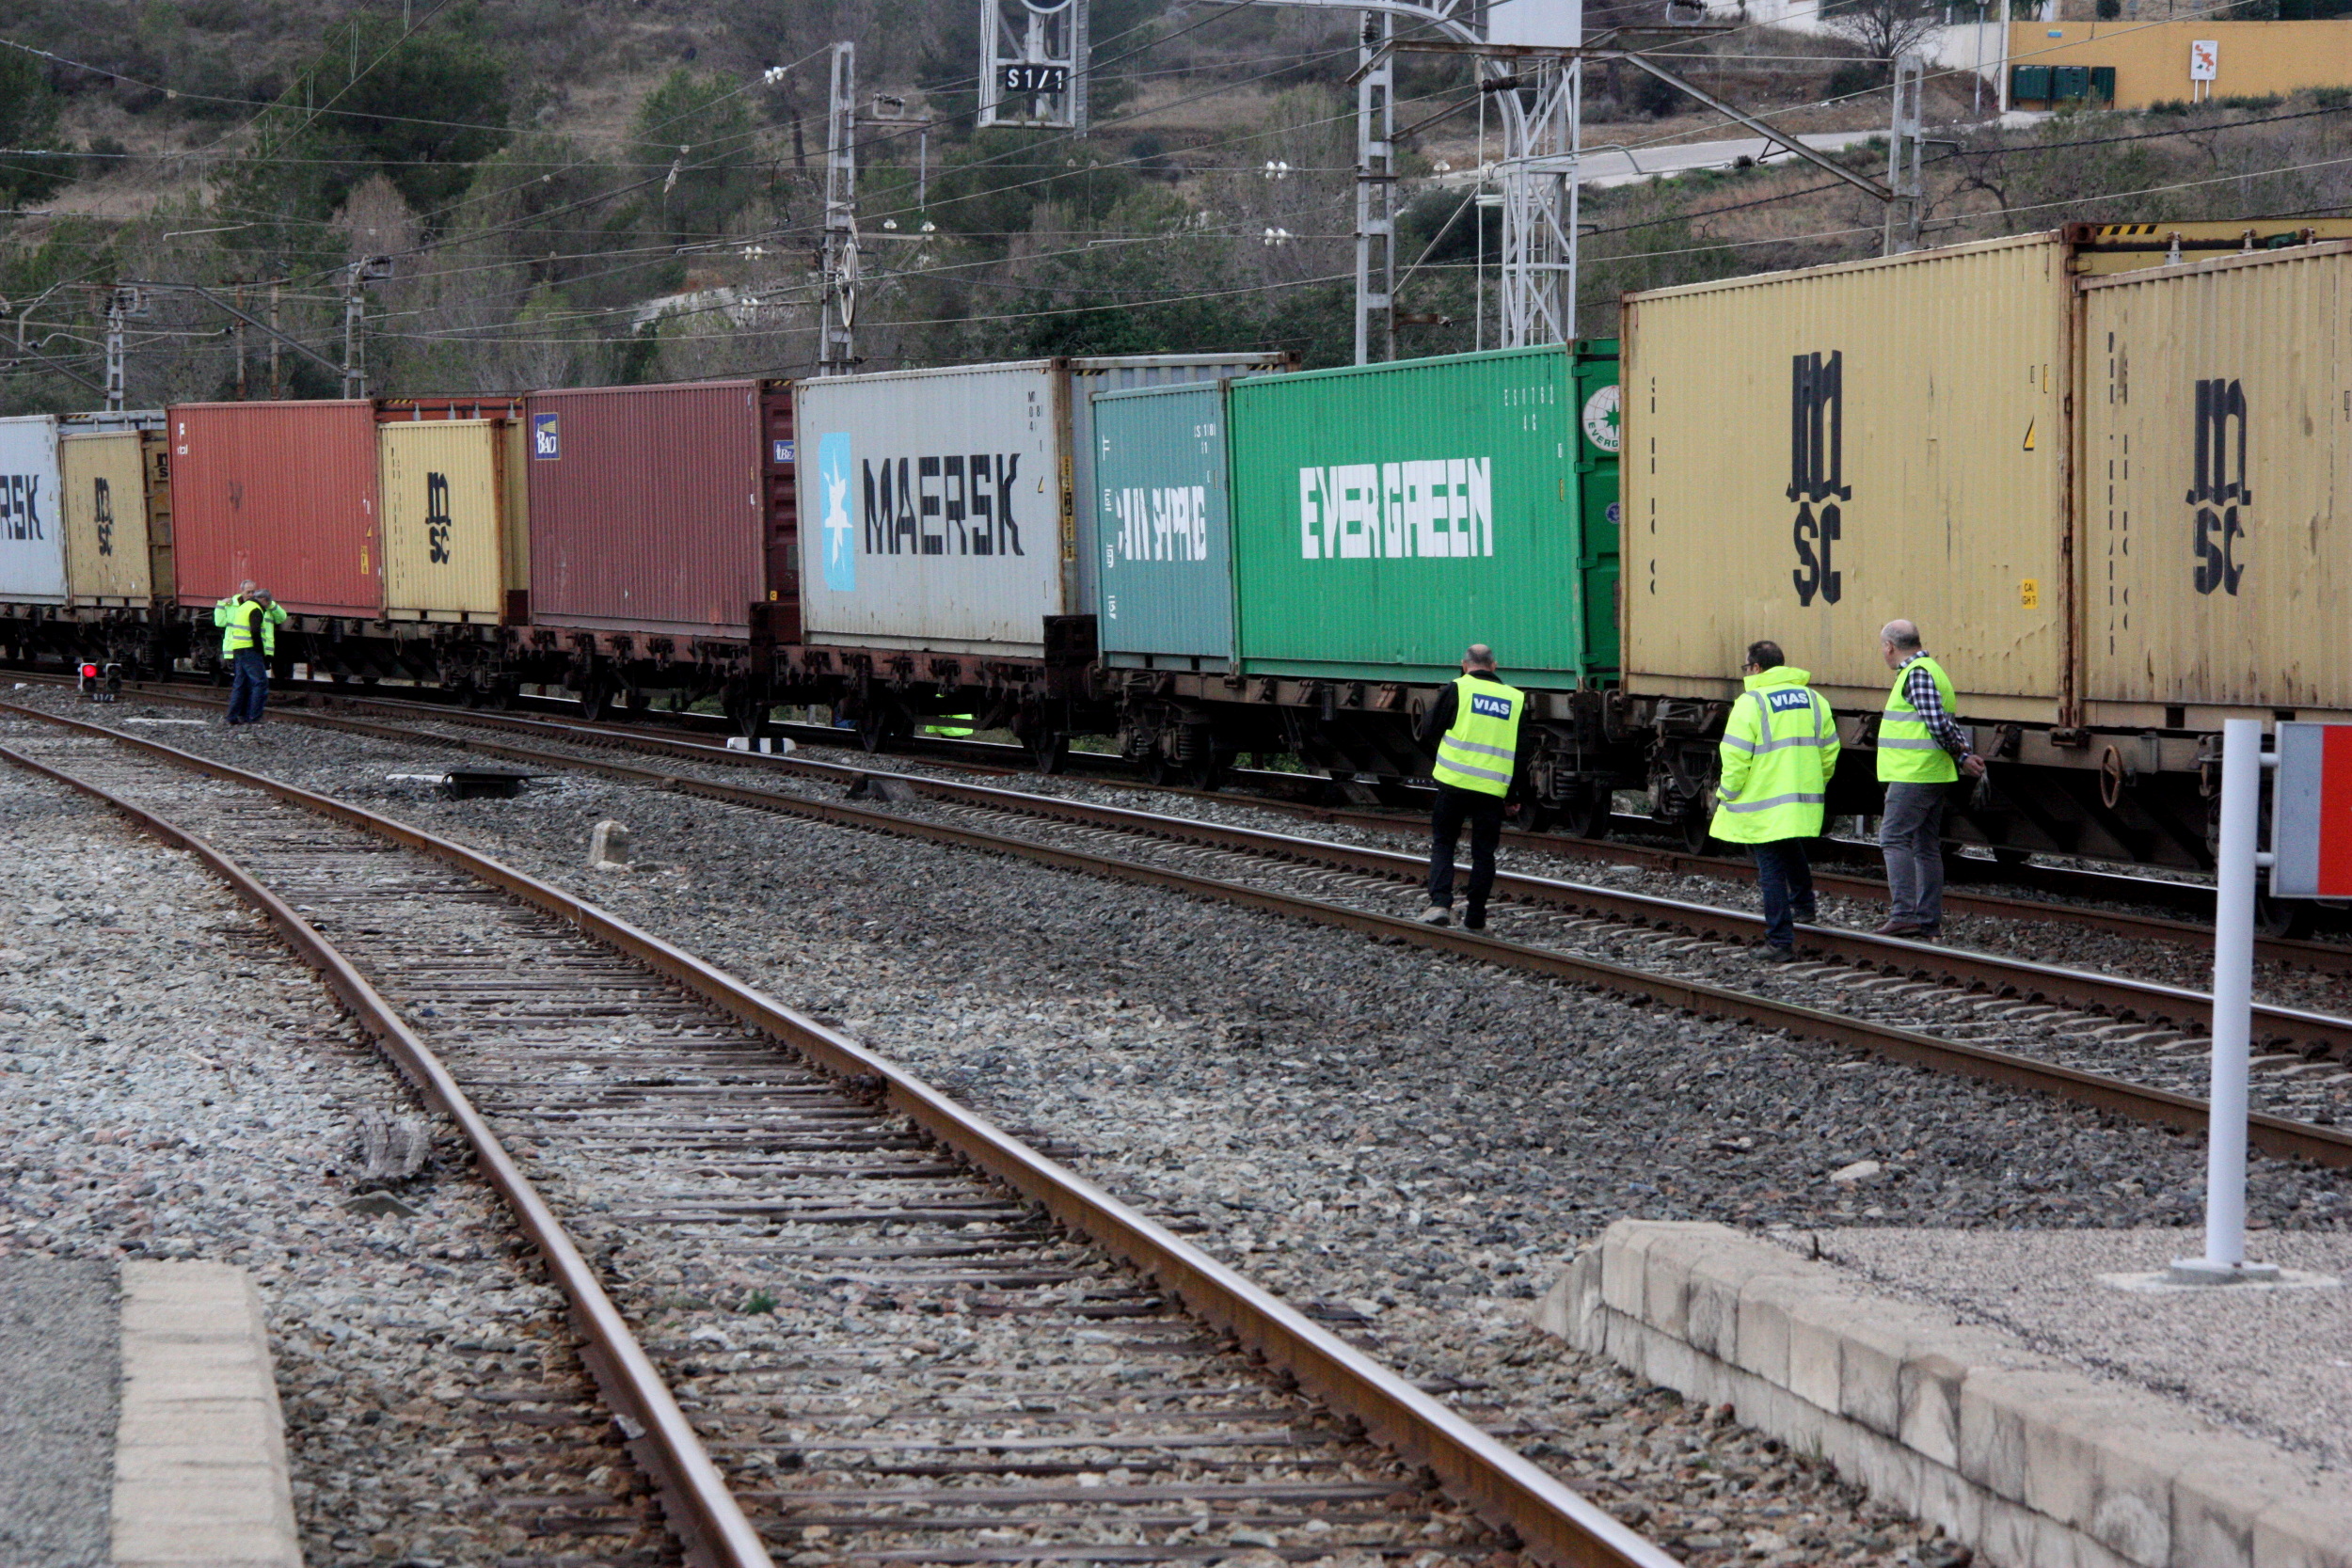 Train transporting goods in the south of Barcelona (by ACN)